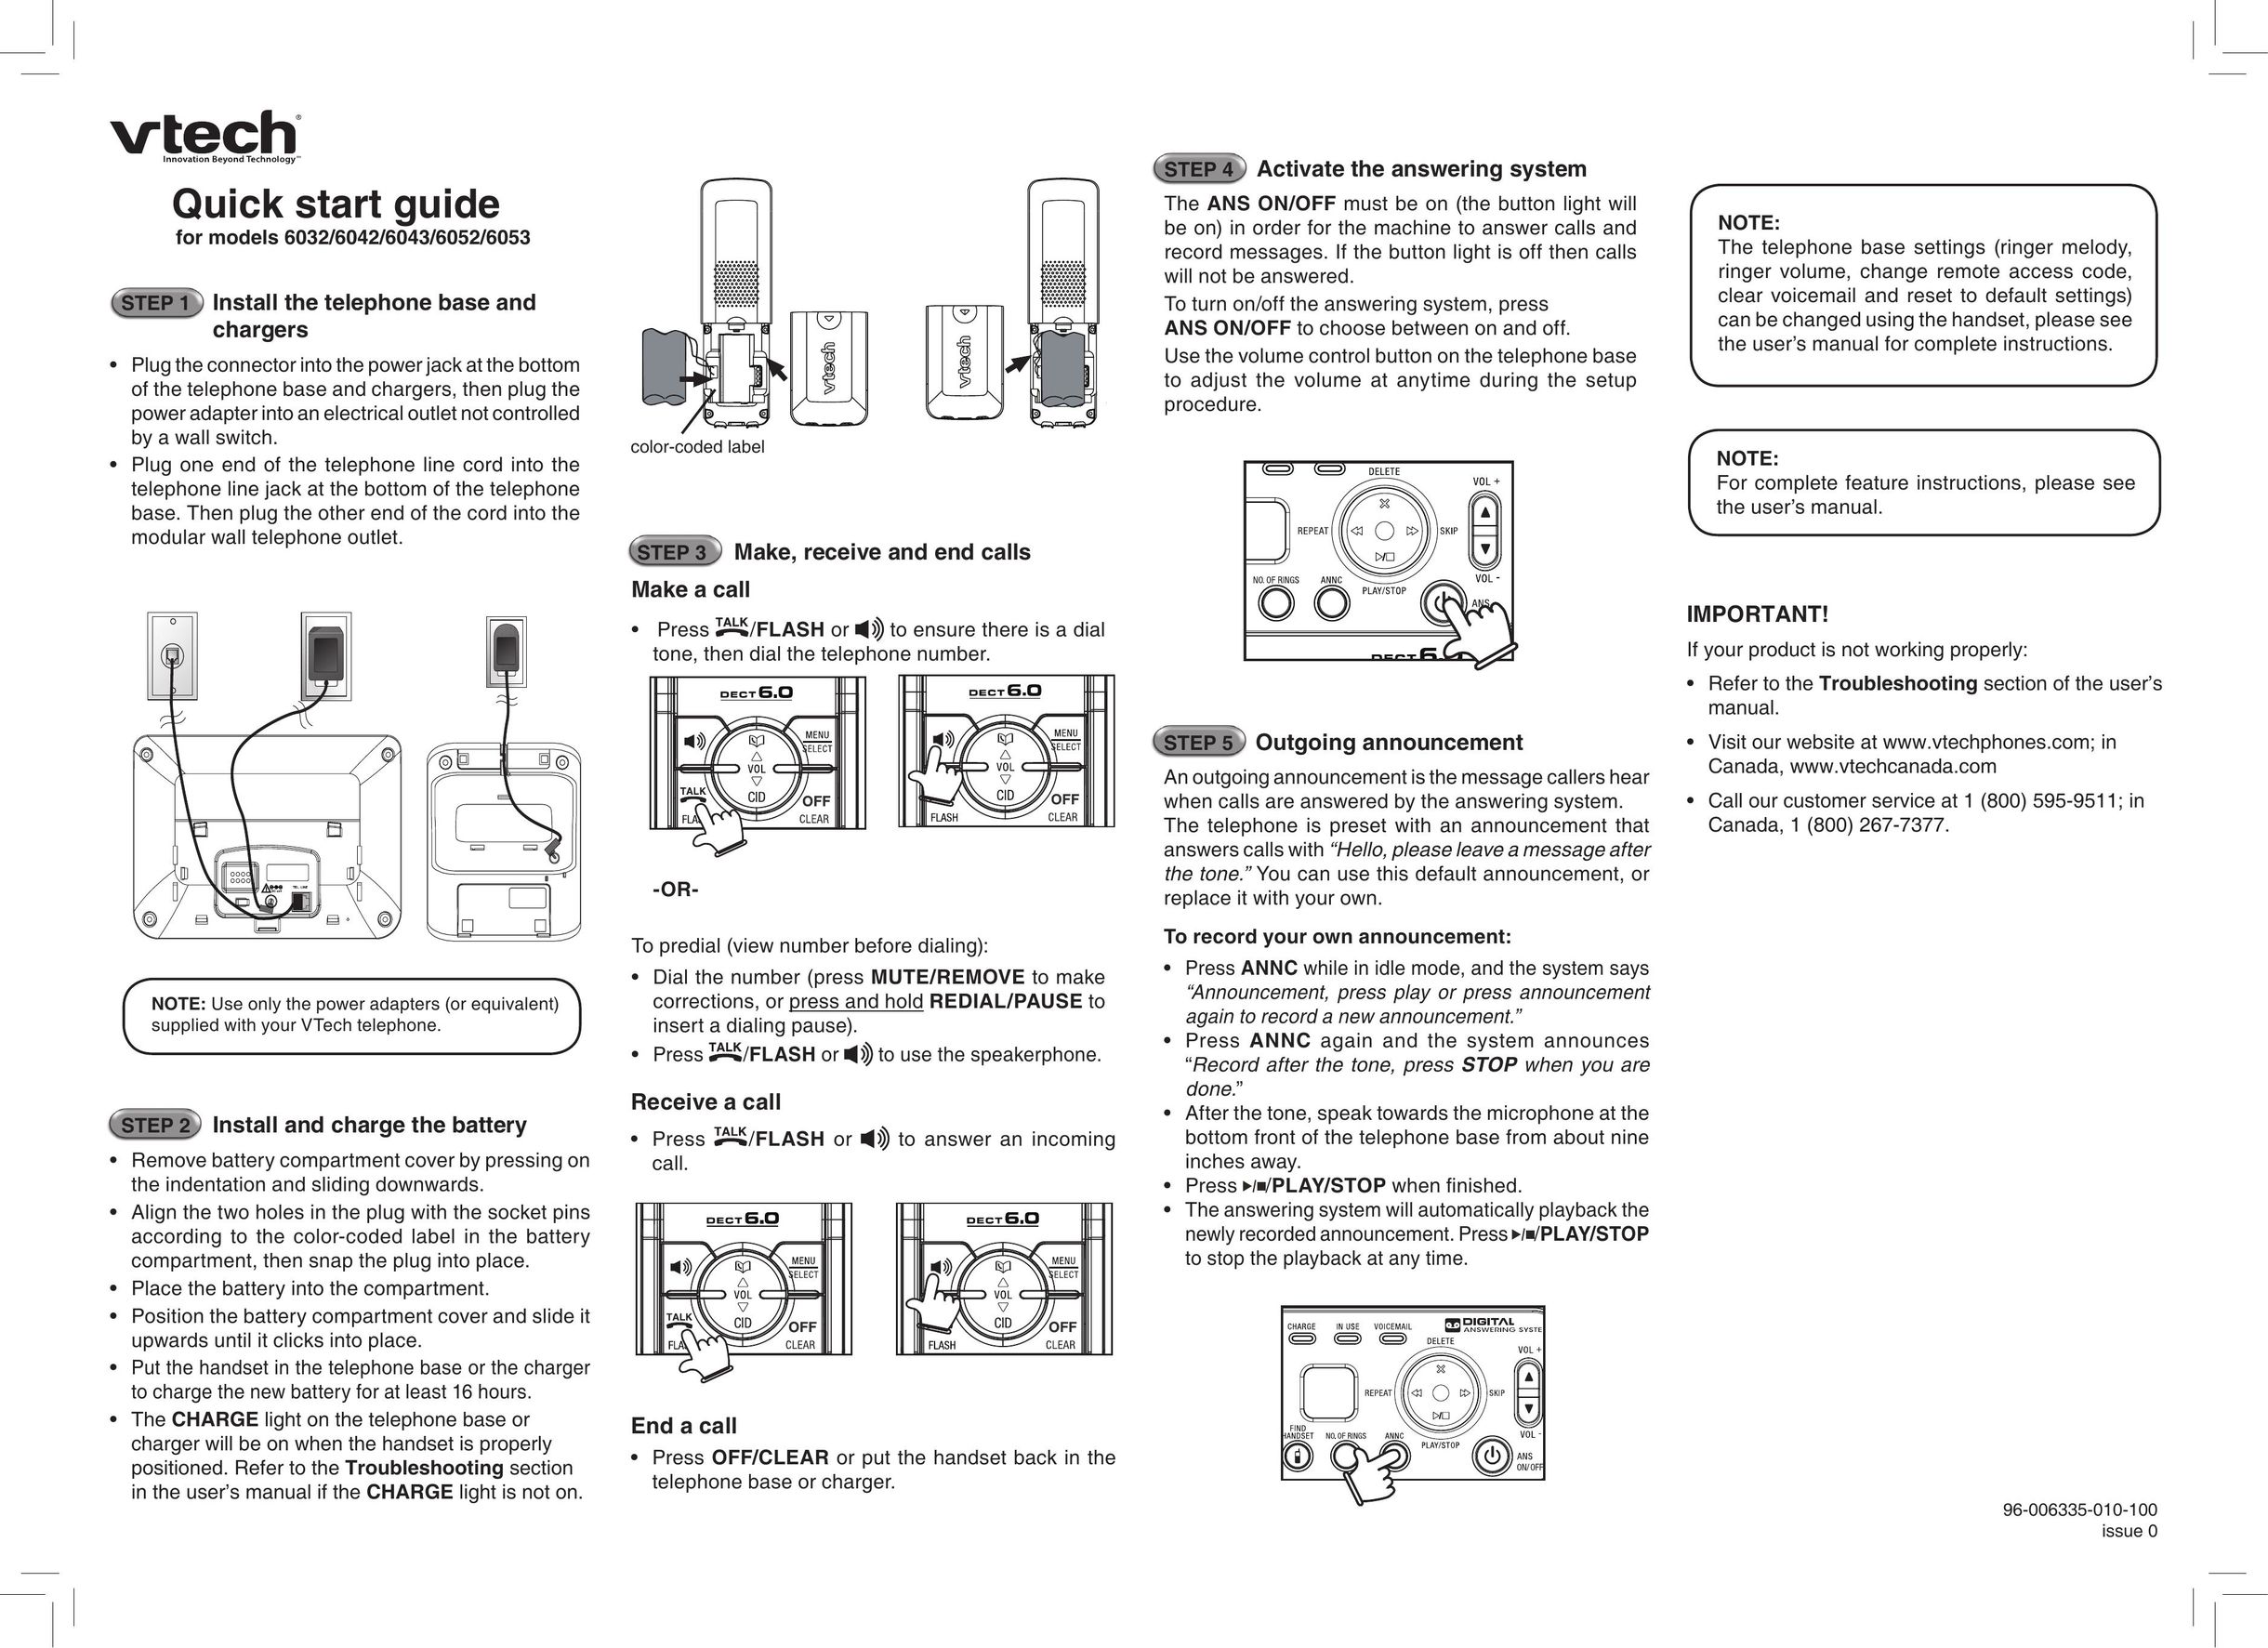 VTech 6042 Cordless Telephone User Manual (Page 1)